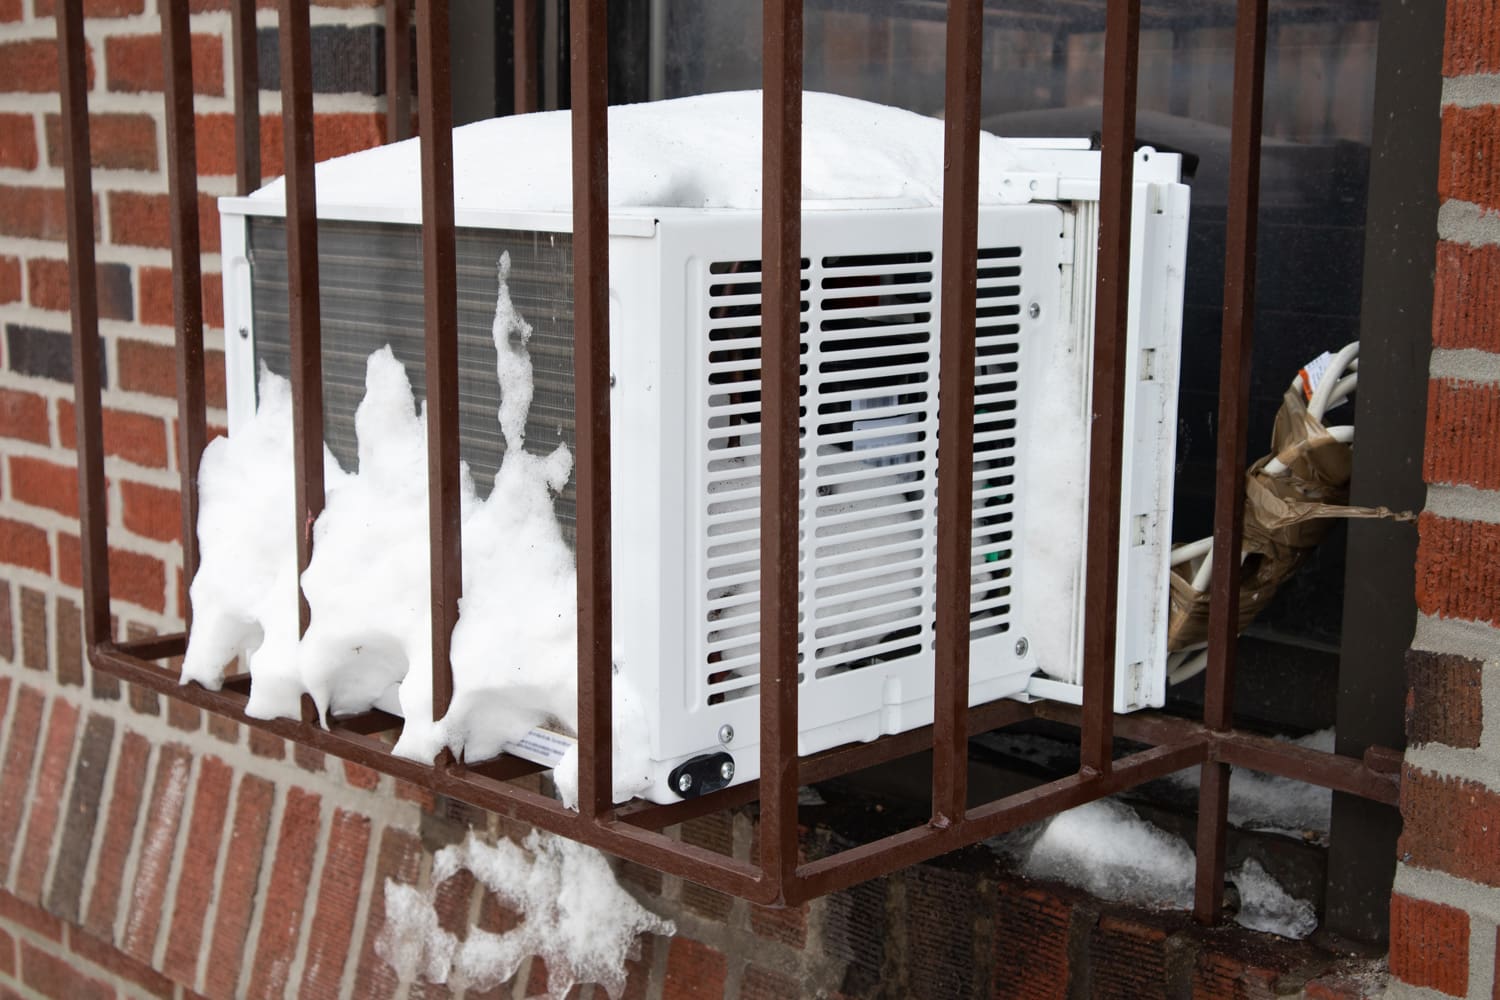 A window air conditioner in a barred cage with snow on a brick urban building in New York City